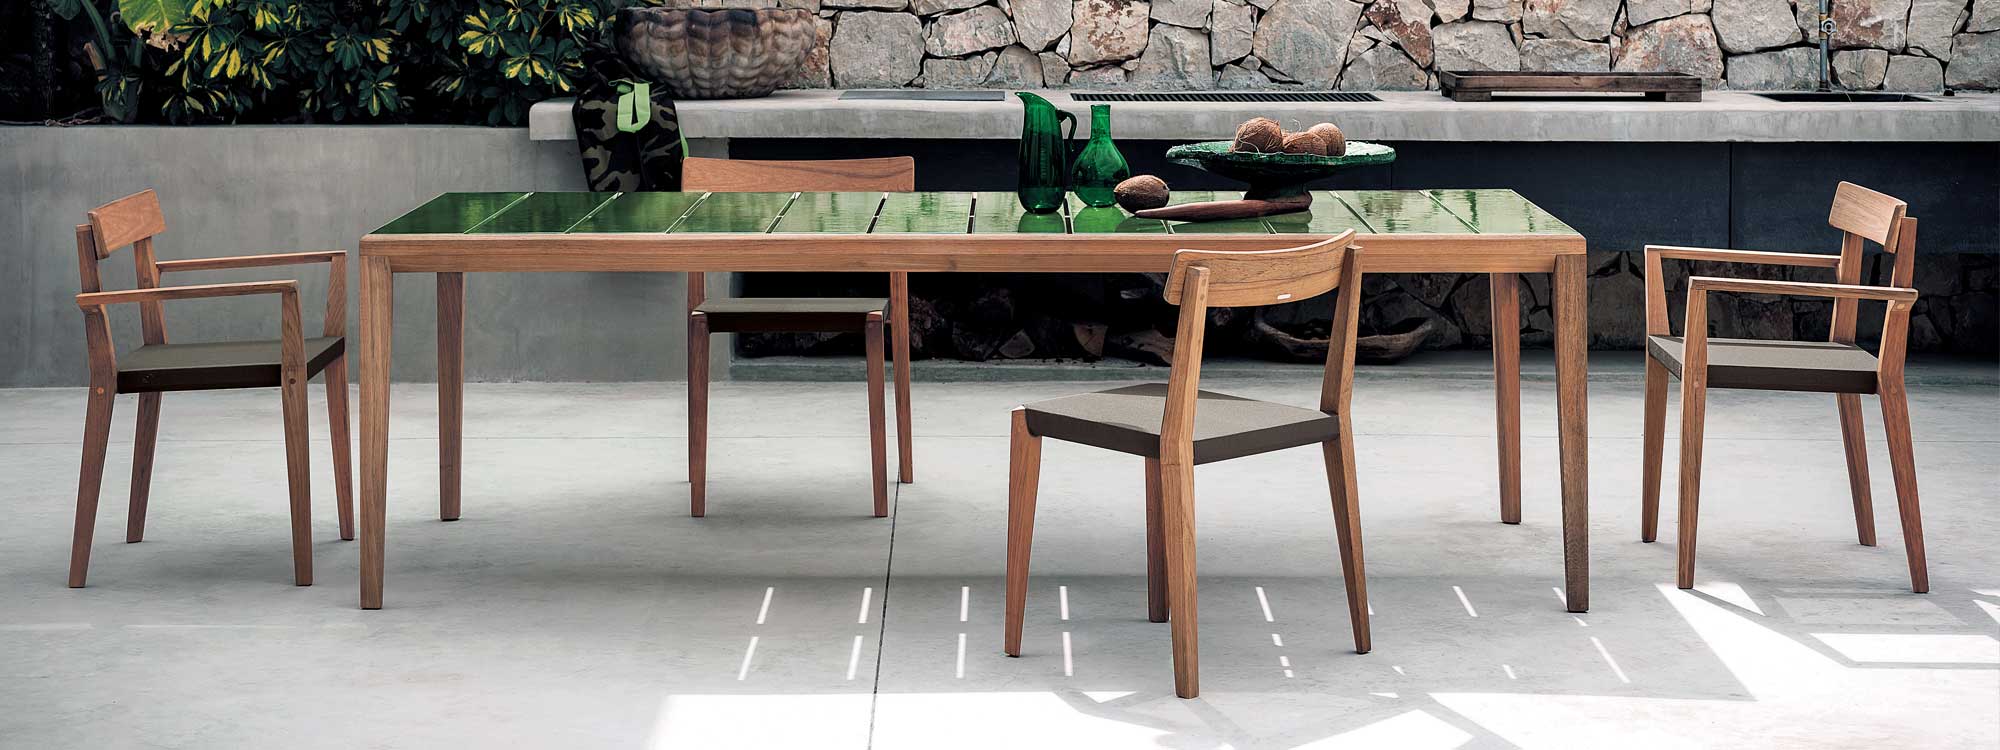 Teka teak chairs with Teka modern garden dining table is a teak & stone outdoor table in all-weather furniture materials by Roda designer garden furniture company.